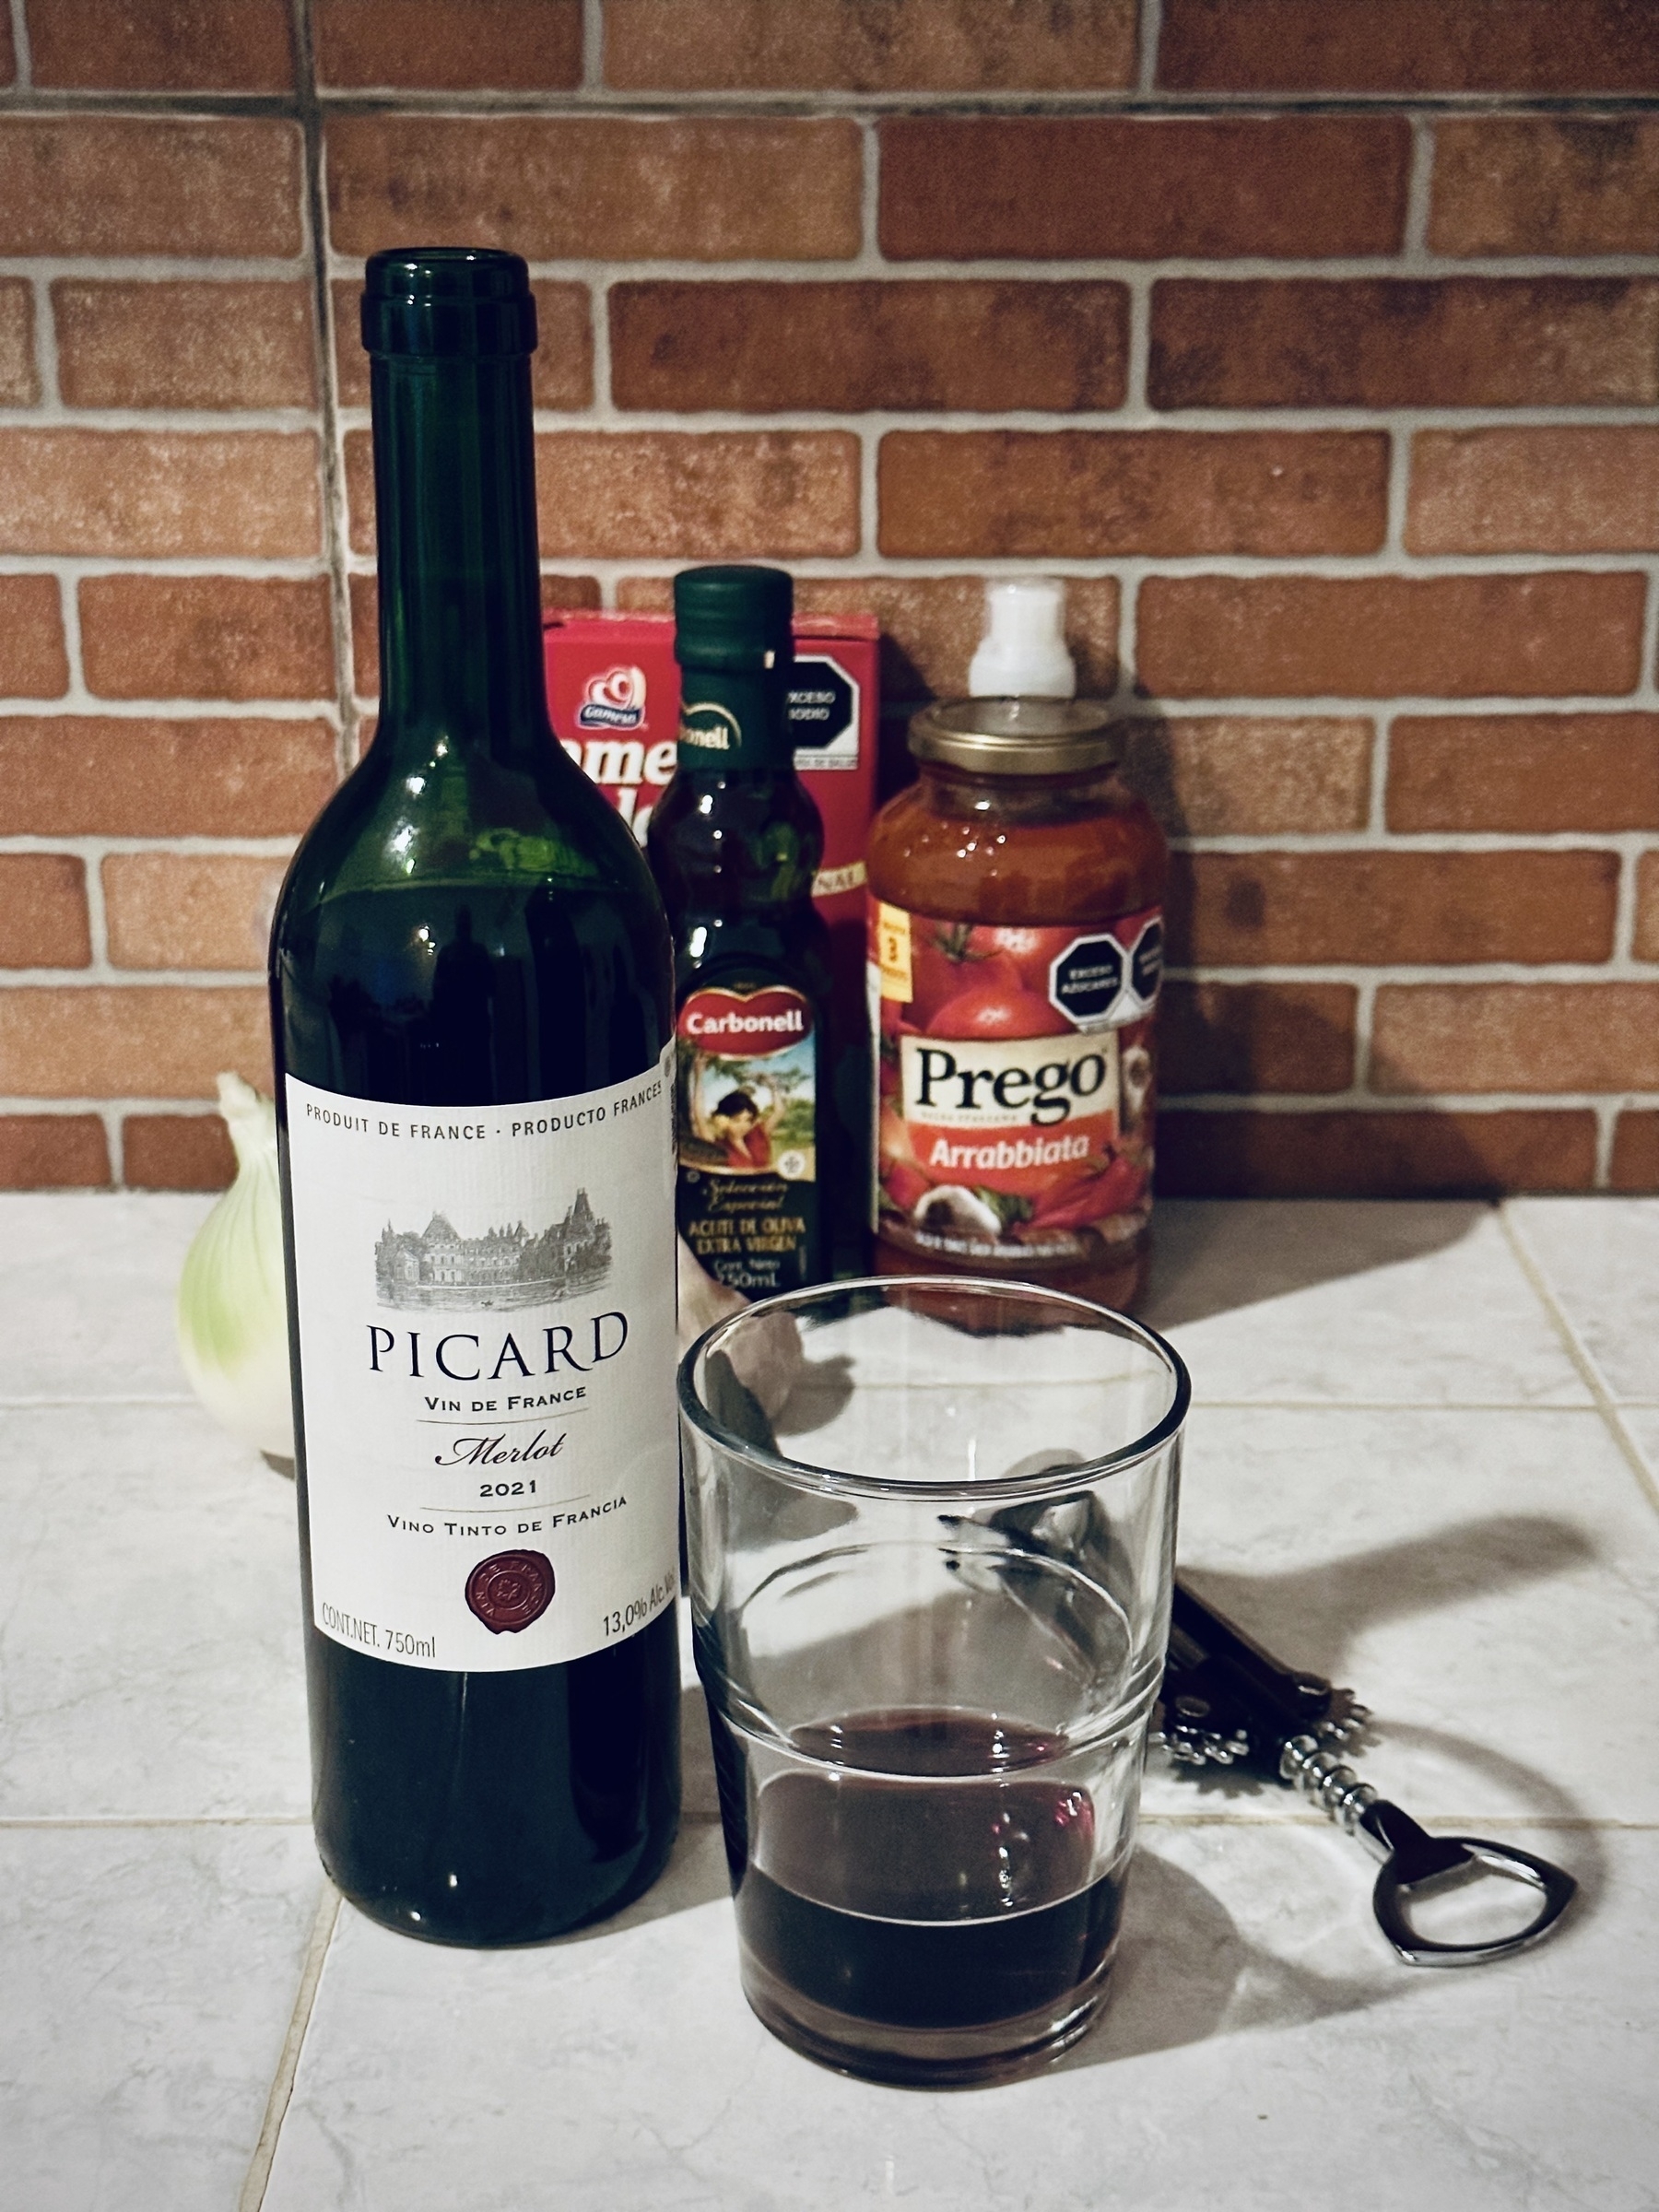 Close up of a quarter full glass tumbler of red wine and the accompanying bottle of Picard Merlot on a white tiled kitchen bench in front of red brown bricks. A bottle opener with ratcheted arms sits just behind. A har of pasta sauce, a small bottle of olive oil, and an onion and a head of garlic line the wall behind.